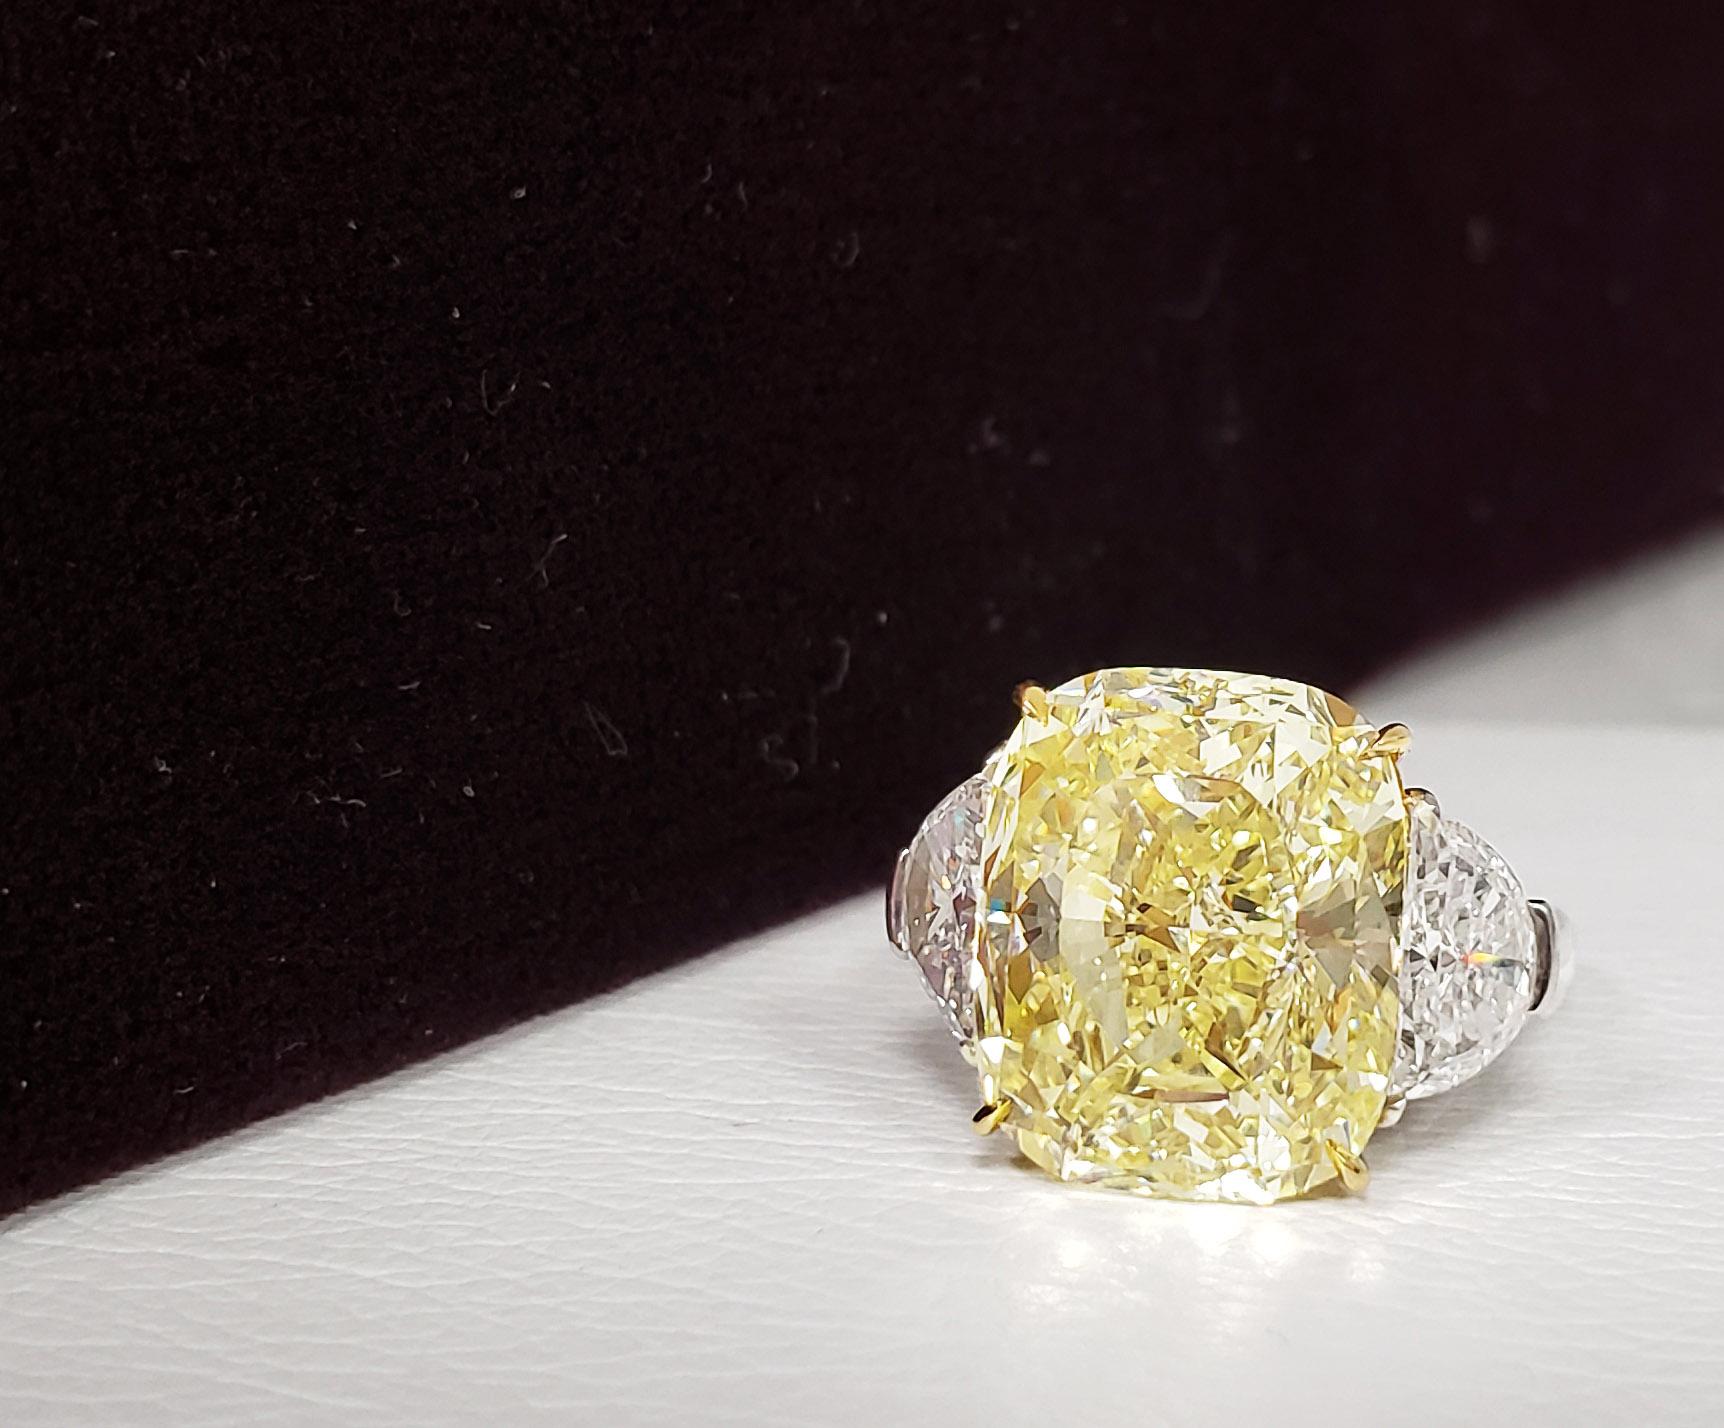 SCARSELLI 11 Carat Fancy Yellow Diamond Engagement Ring in Platinum In New Condition For Sale In New York, NY